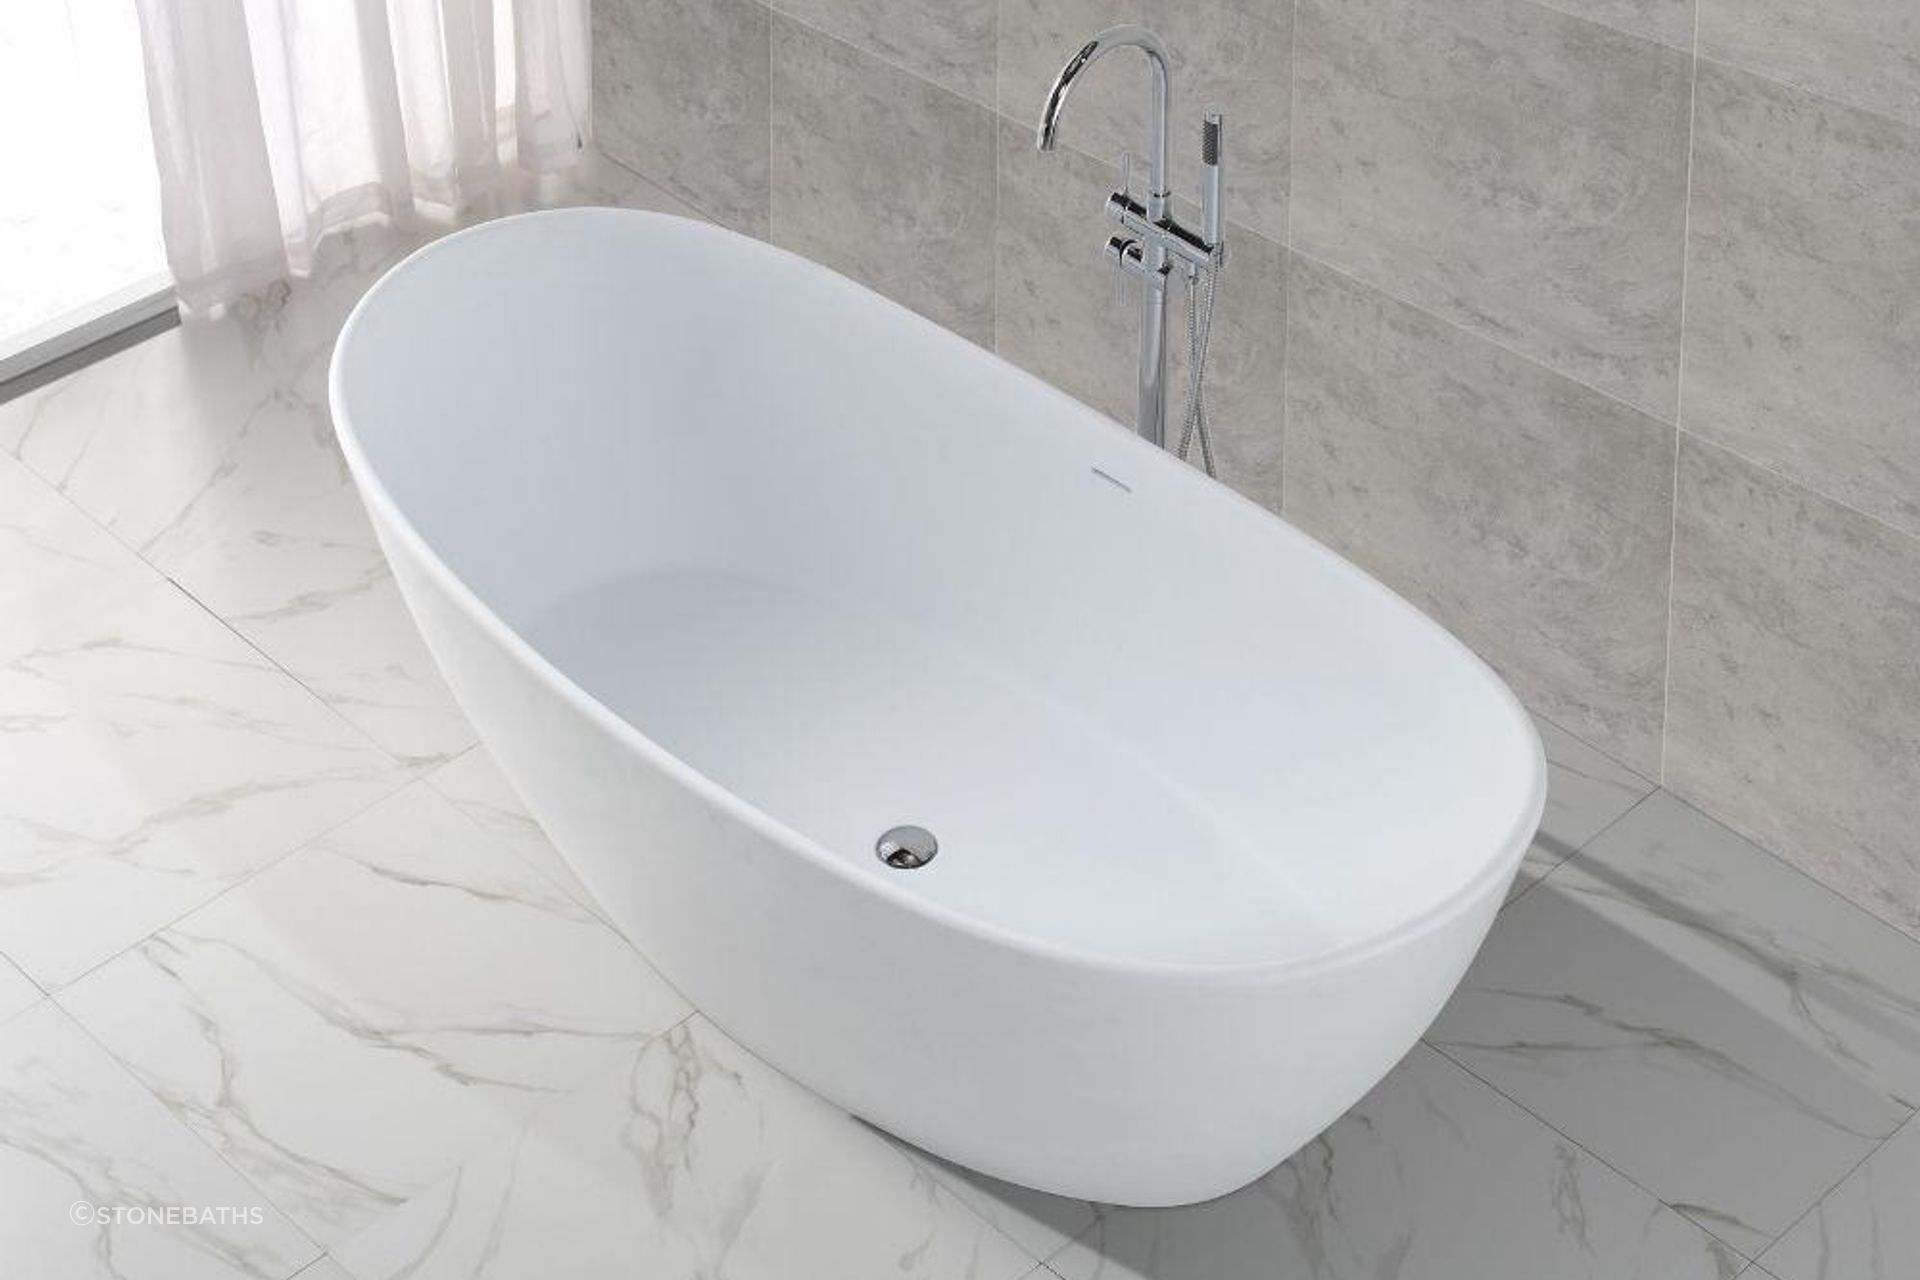 The B034 freestanding hugi bath can sit comfortably in the centre or to the side of a bathroom